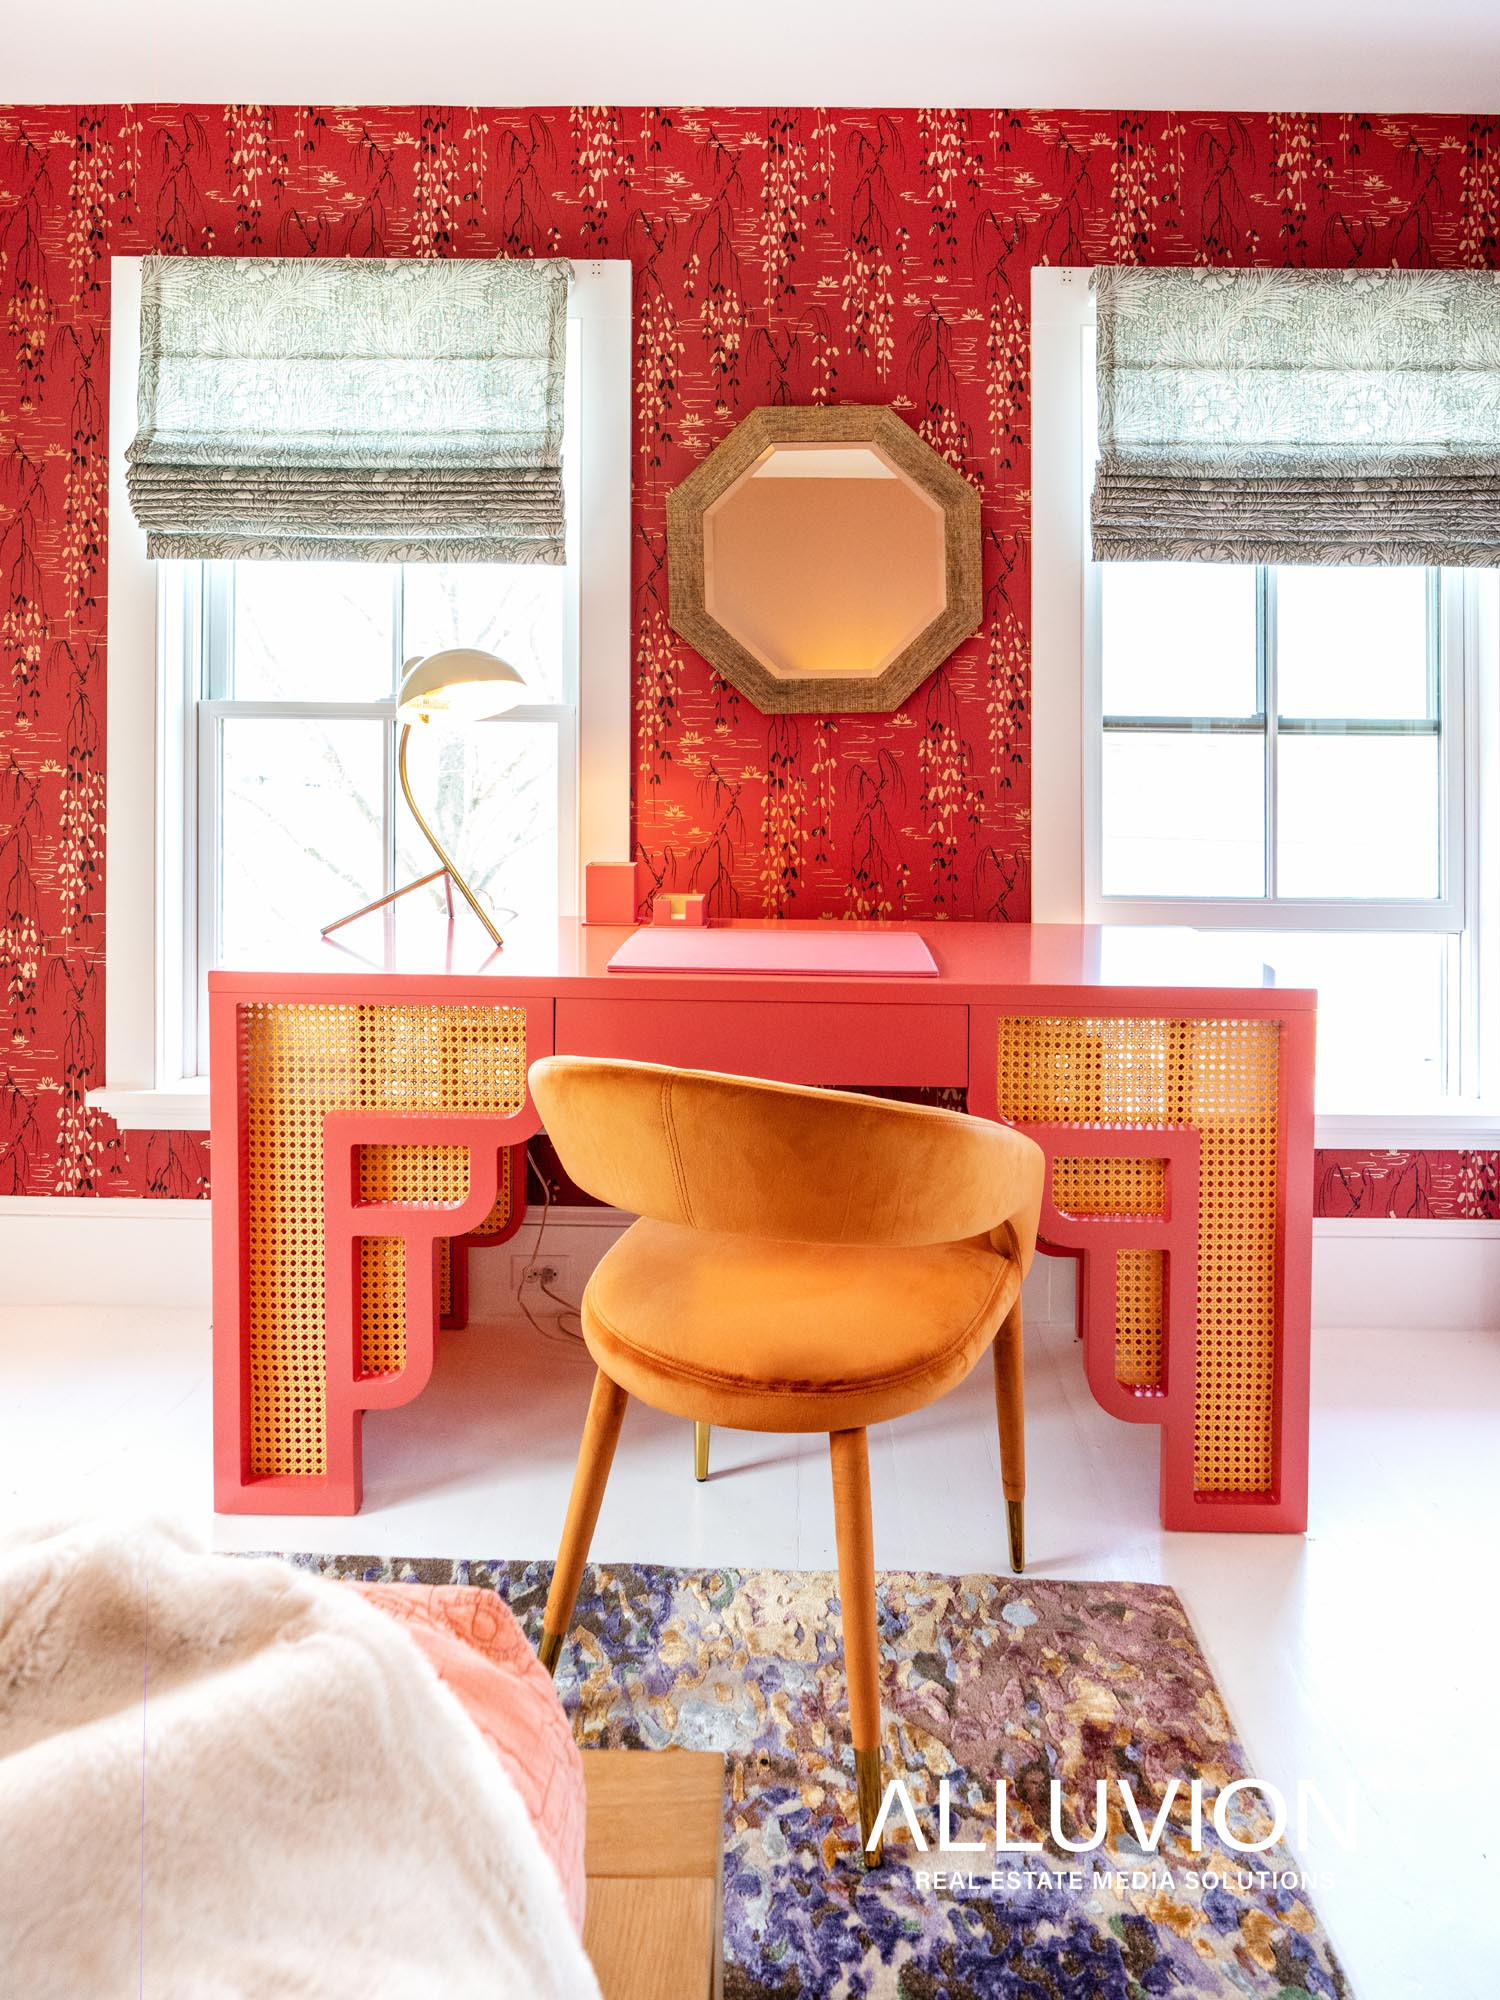 Upstate, NY Lakehouse – Interior Design Editorial Photoshoot by Photographer Maxwell Alexander – Indulge in the latest interior design trends with the bold and luxurious maximalist style, featuring eye-catching patterns, textures, and colors that add depth and personality to any space